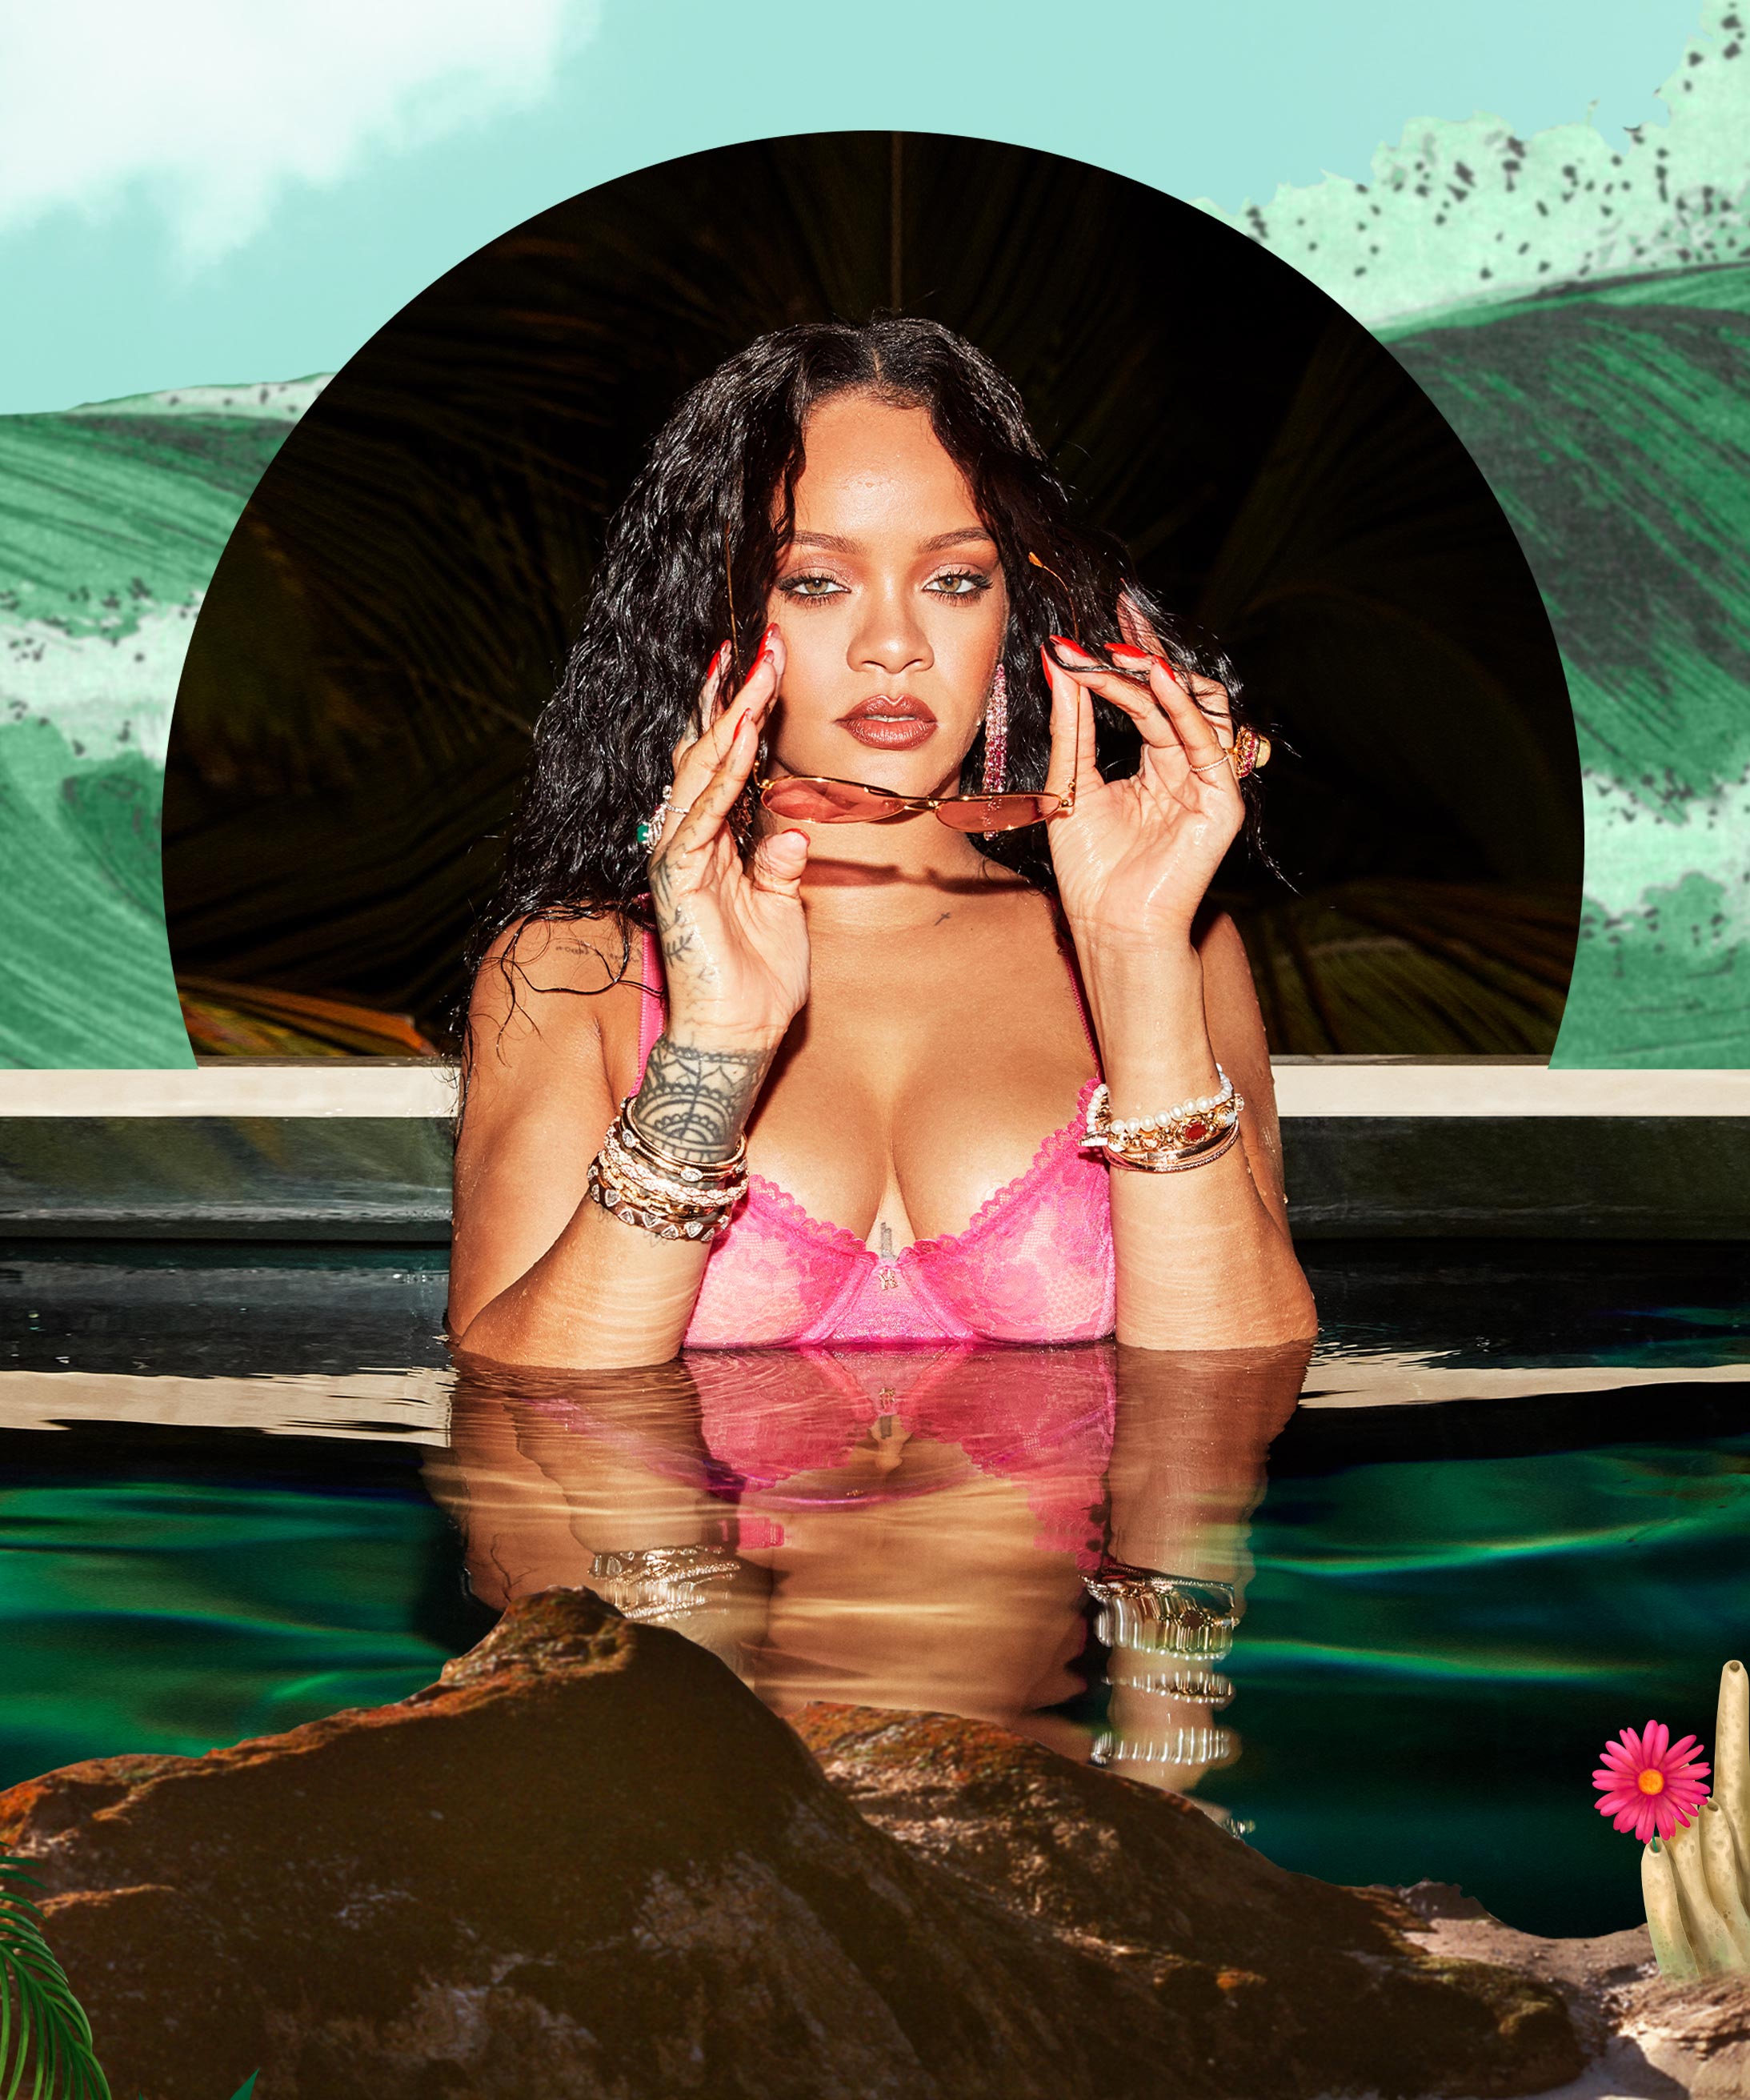 Rihanna Poses in Red Fishnet Lingerie for Savage x Fenty Shoot